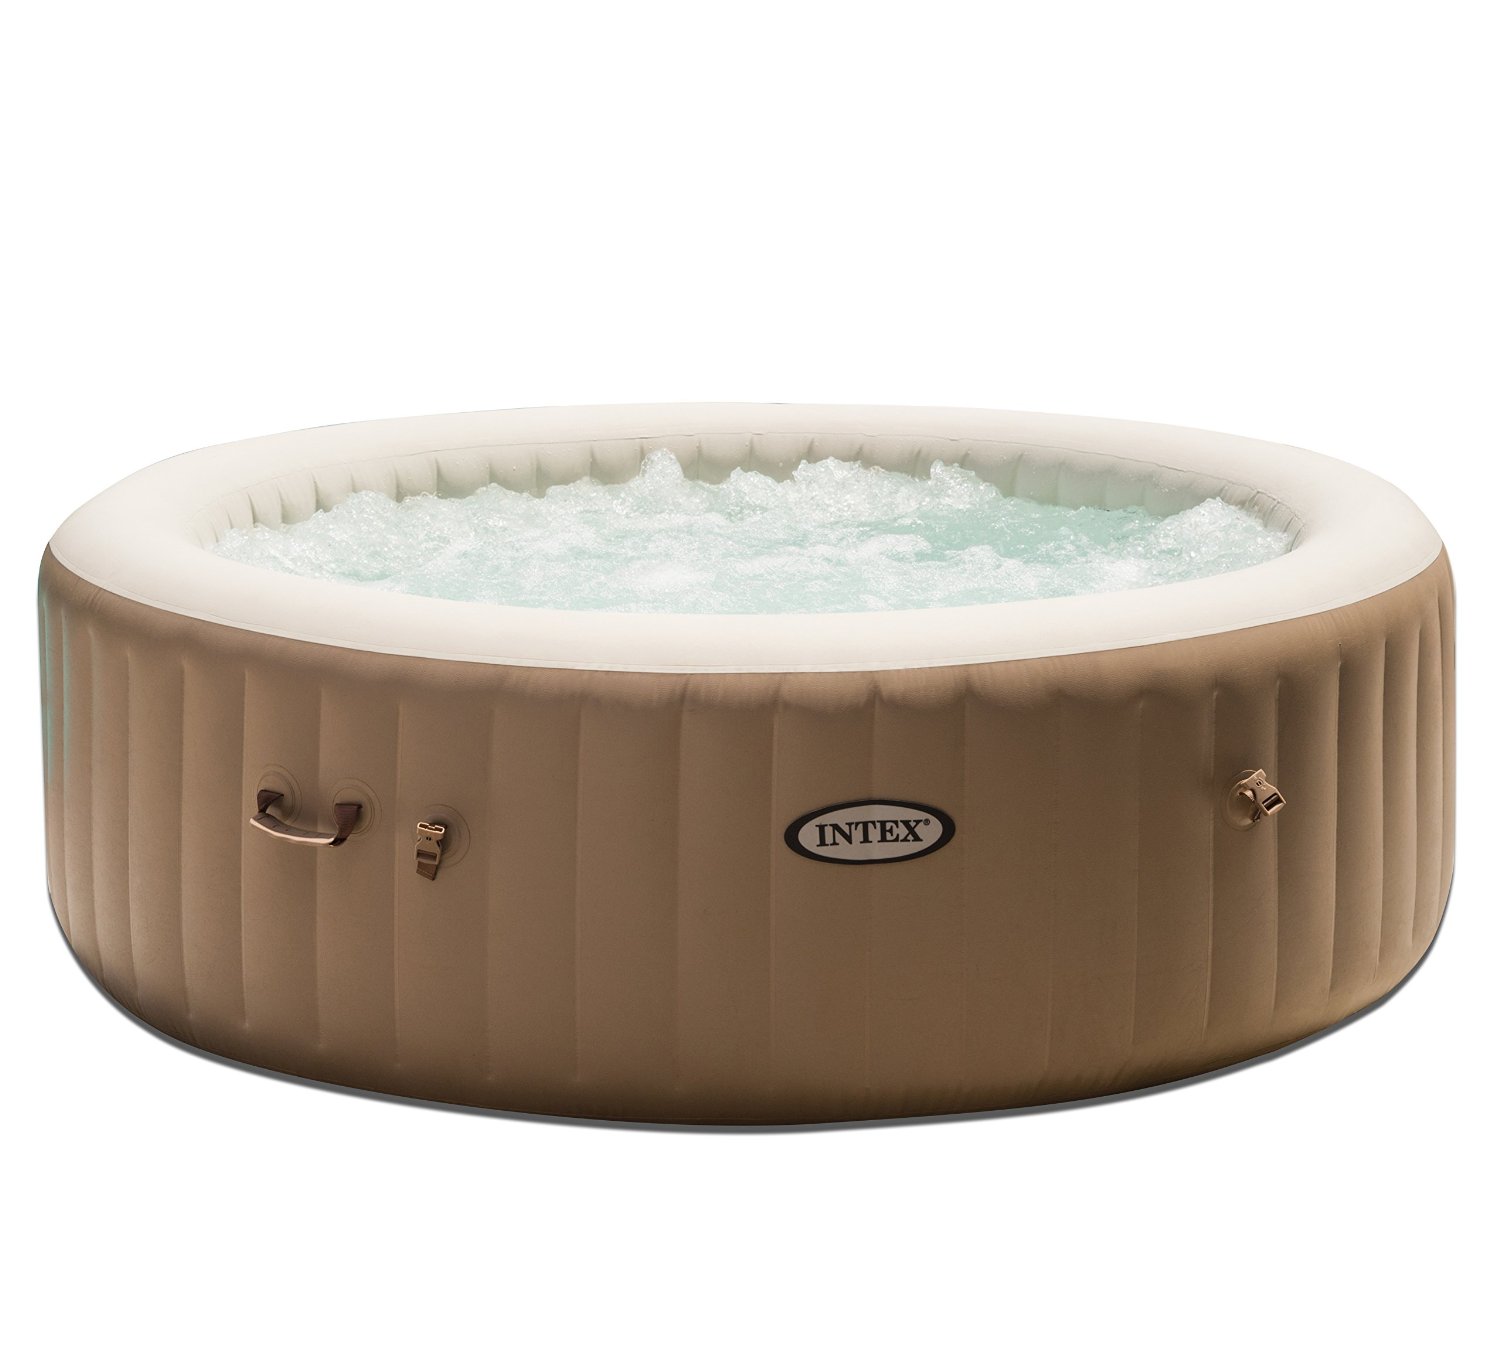 Intex 85in Purespa Portable Bubble Massage Spa Set Review Best Inflatable Hot Tub Center